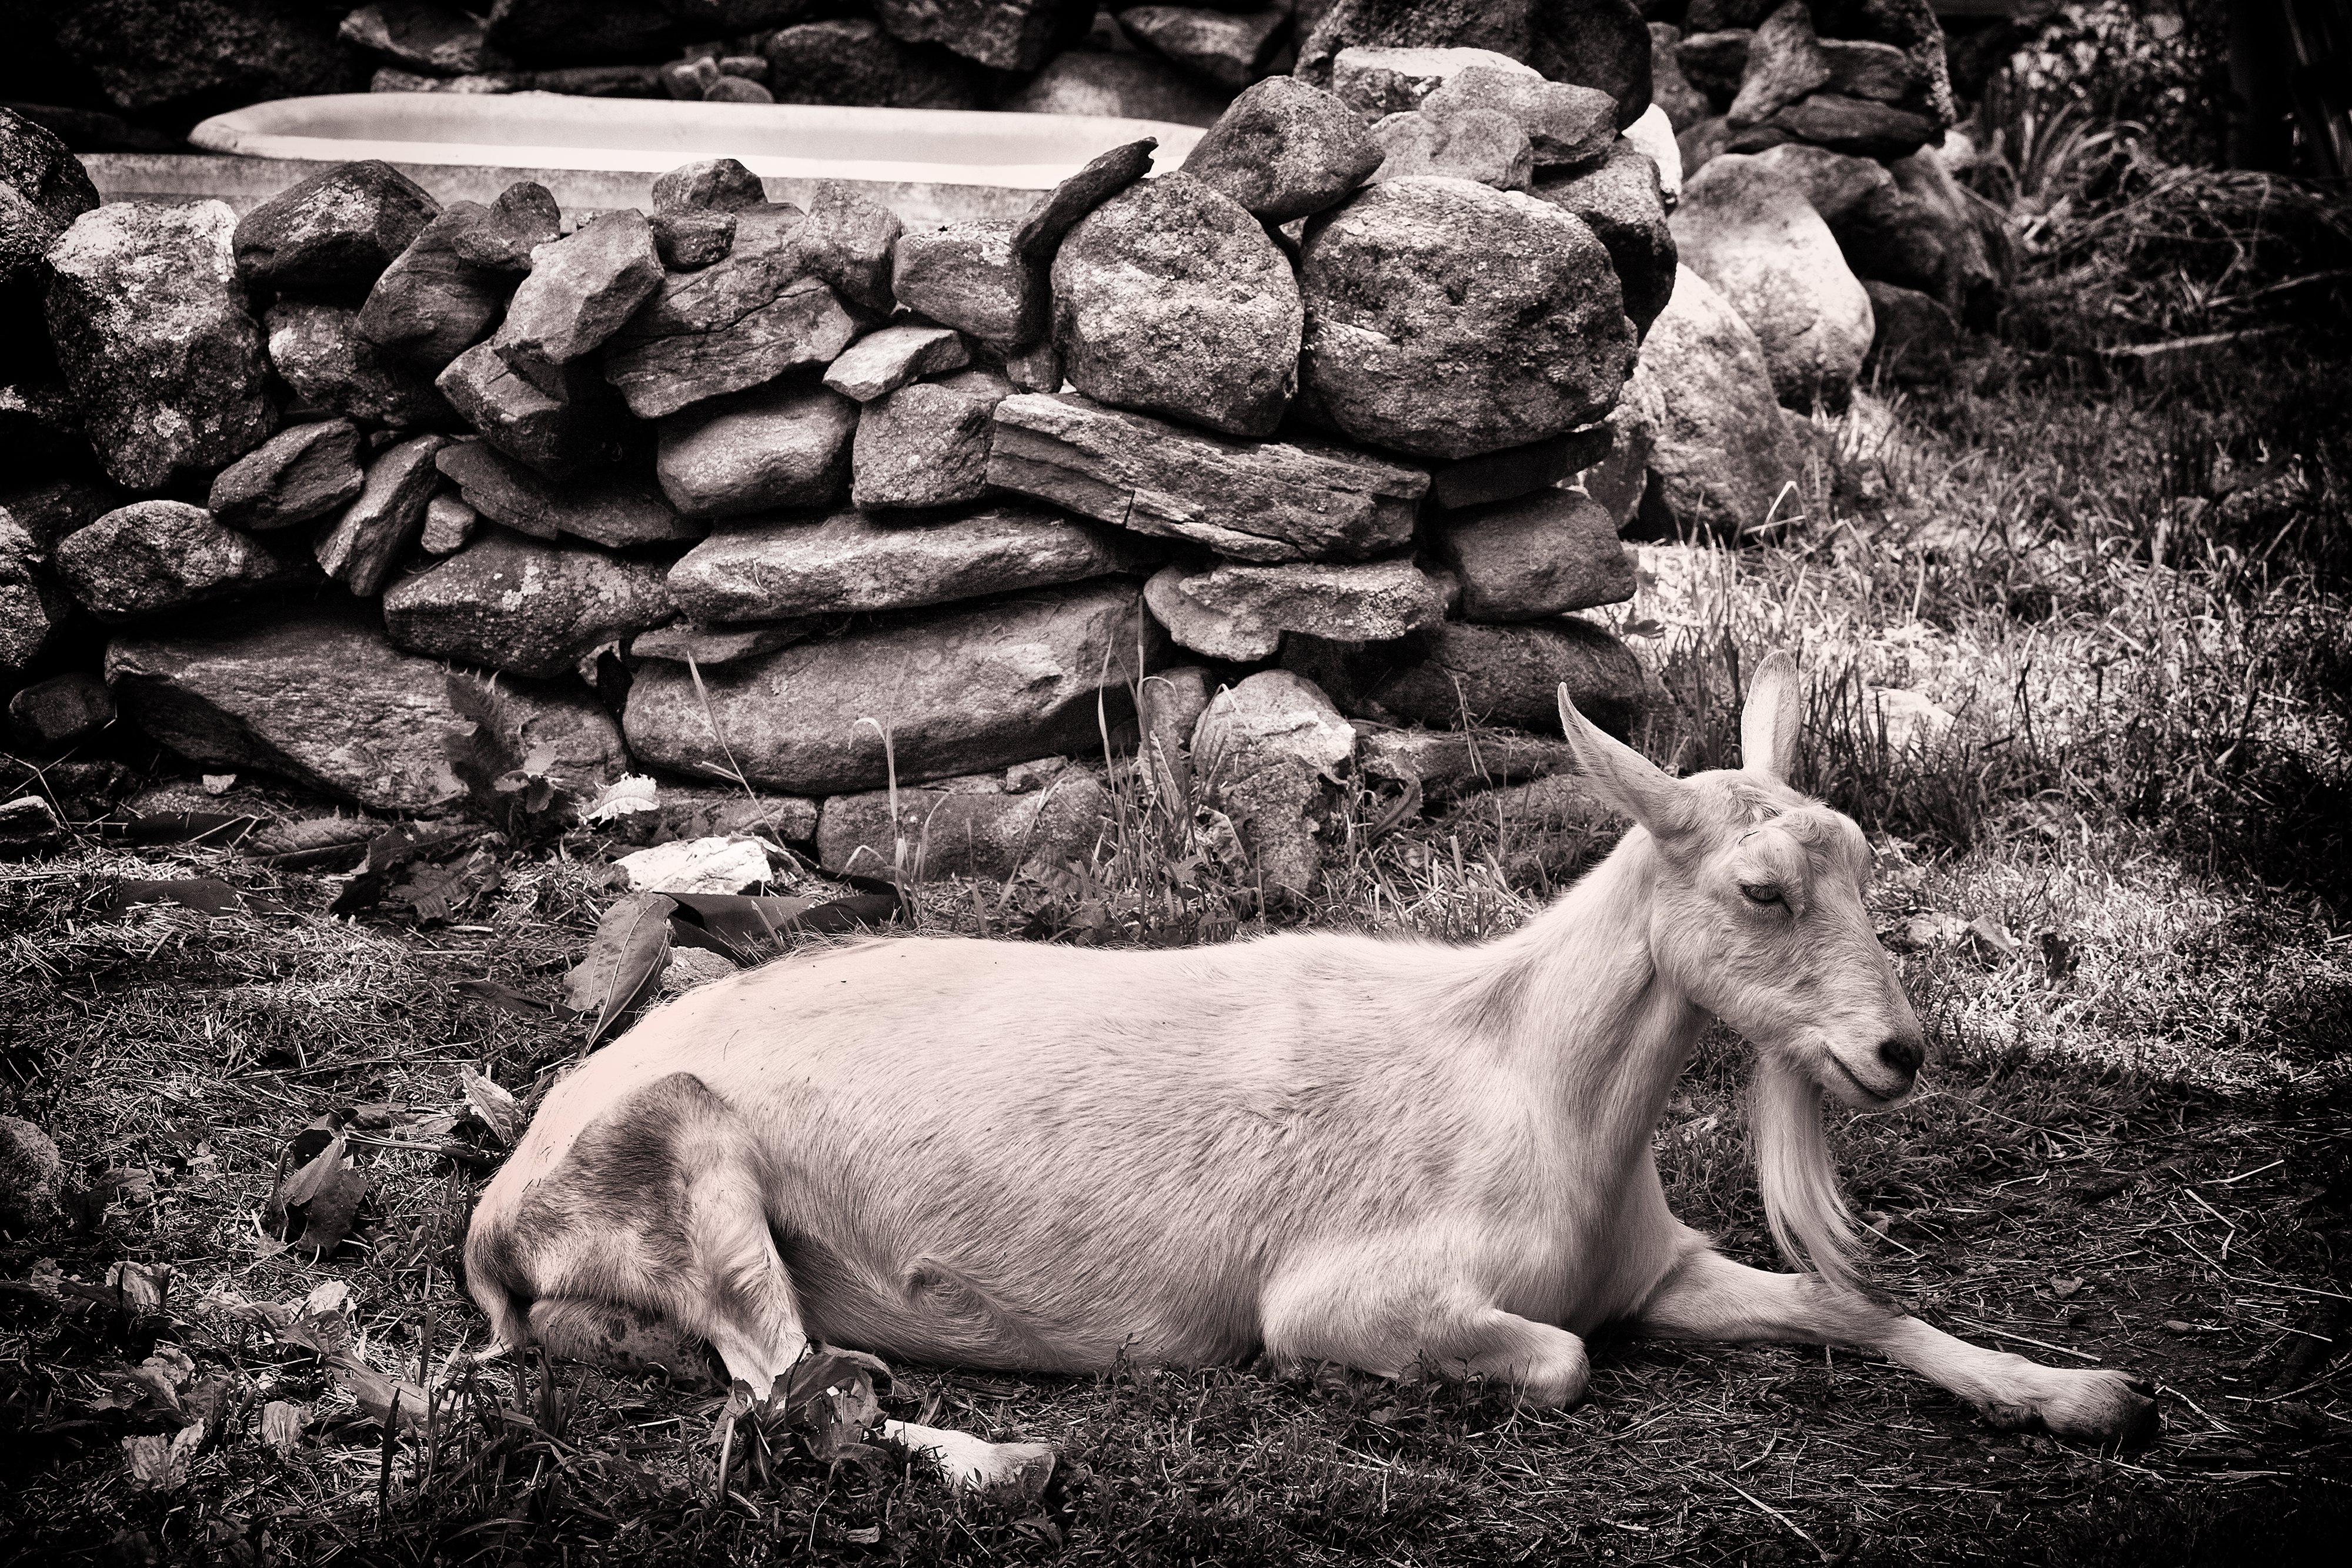 Goat at Beltane Farms 2